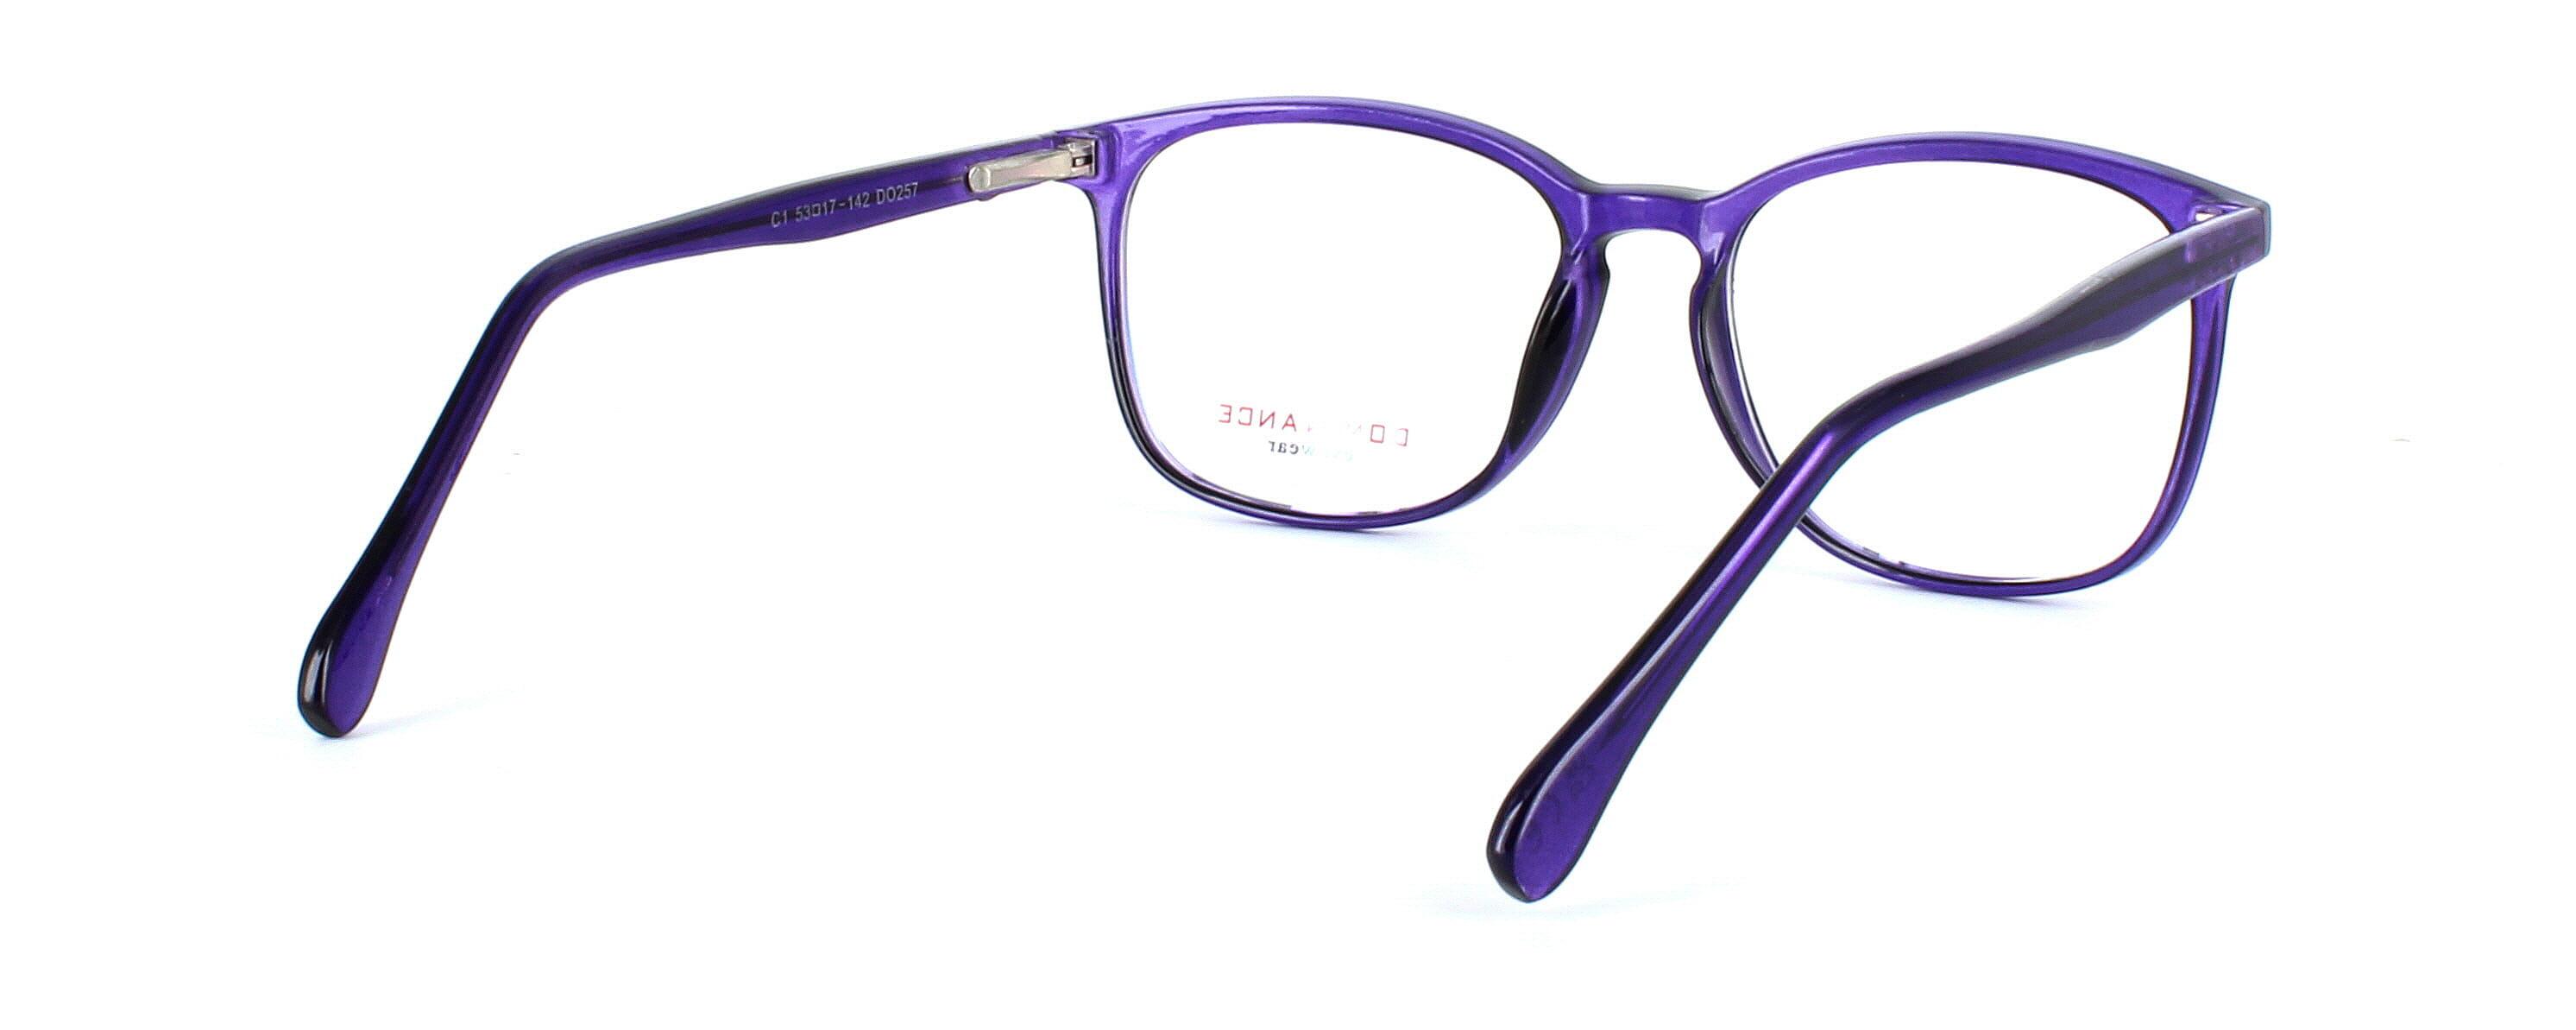 Liberty is a stylish unisex plastic glasses frame here in purple - image view 5